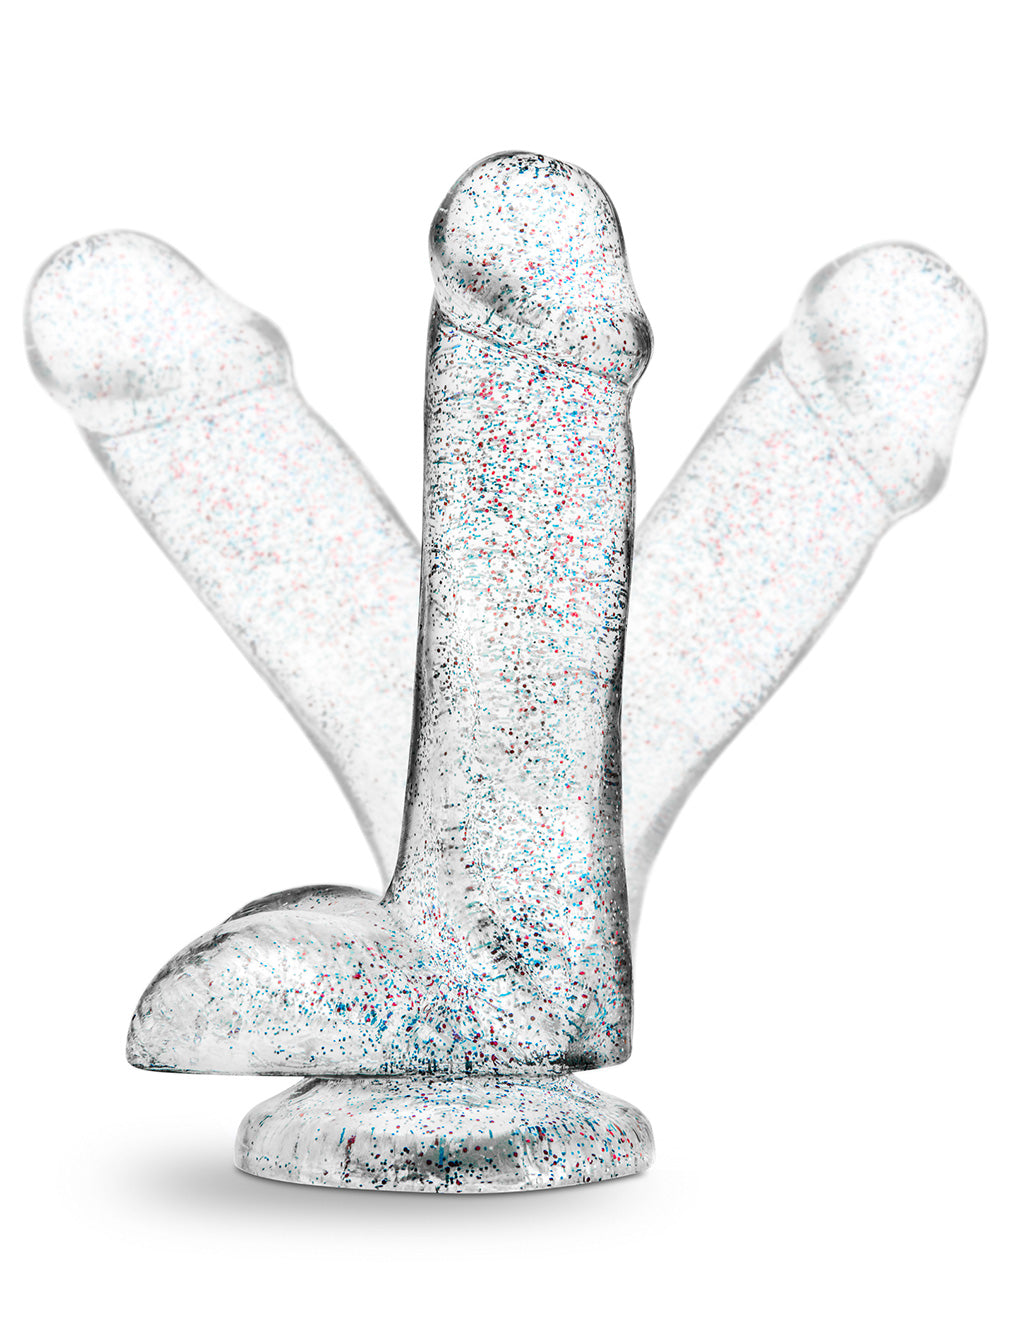 Naturally Yours by Blush Novelties 6 Inch Glitter Cock